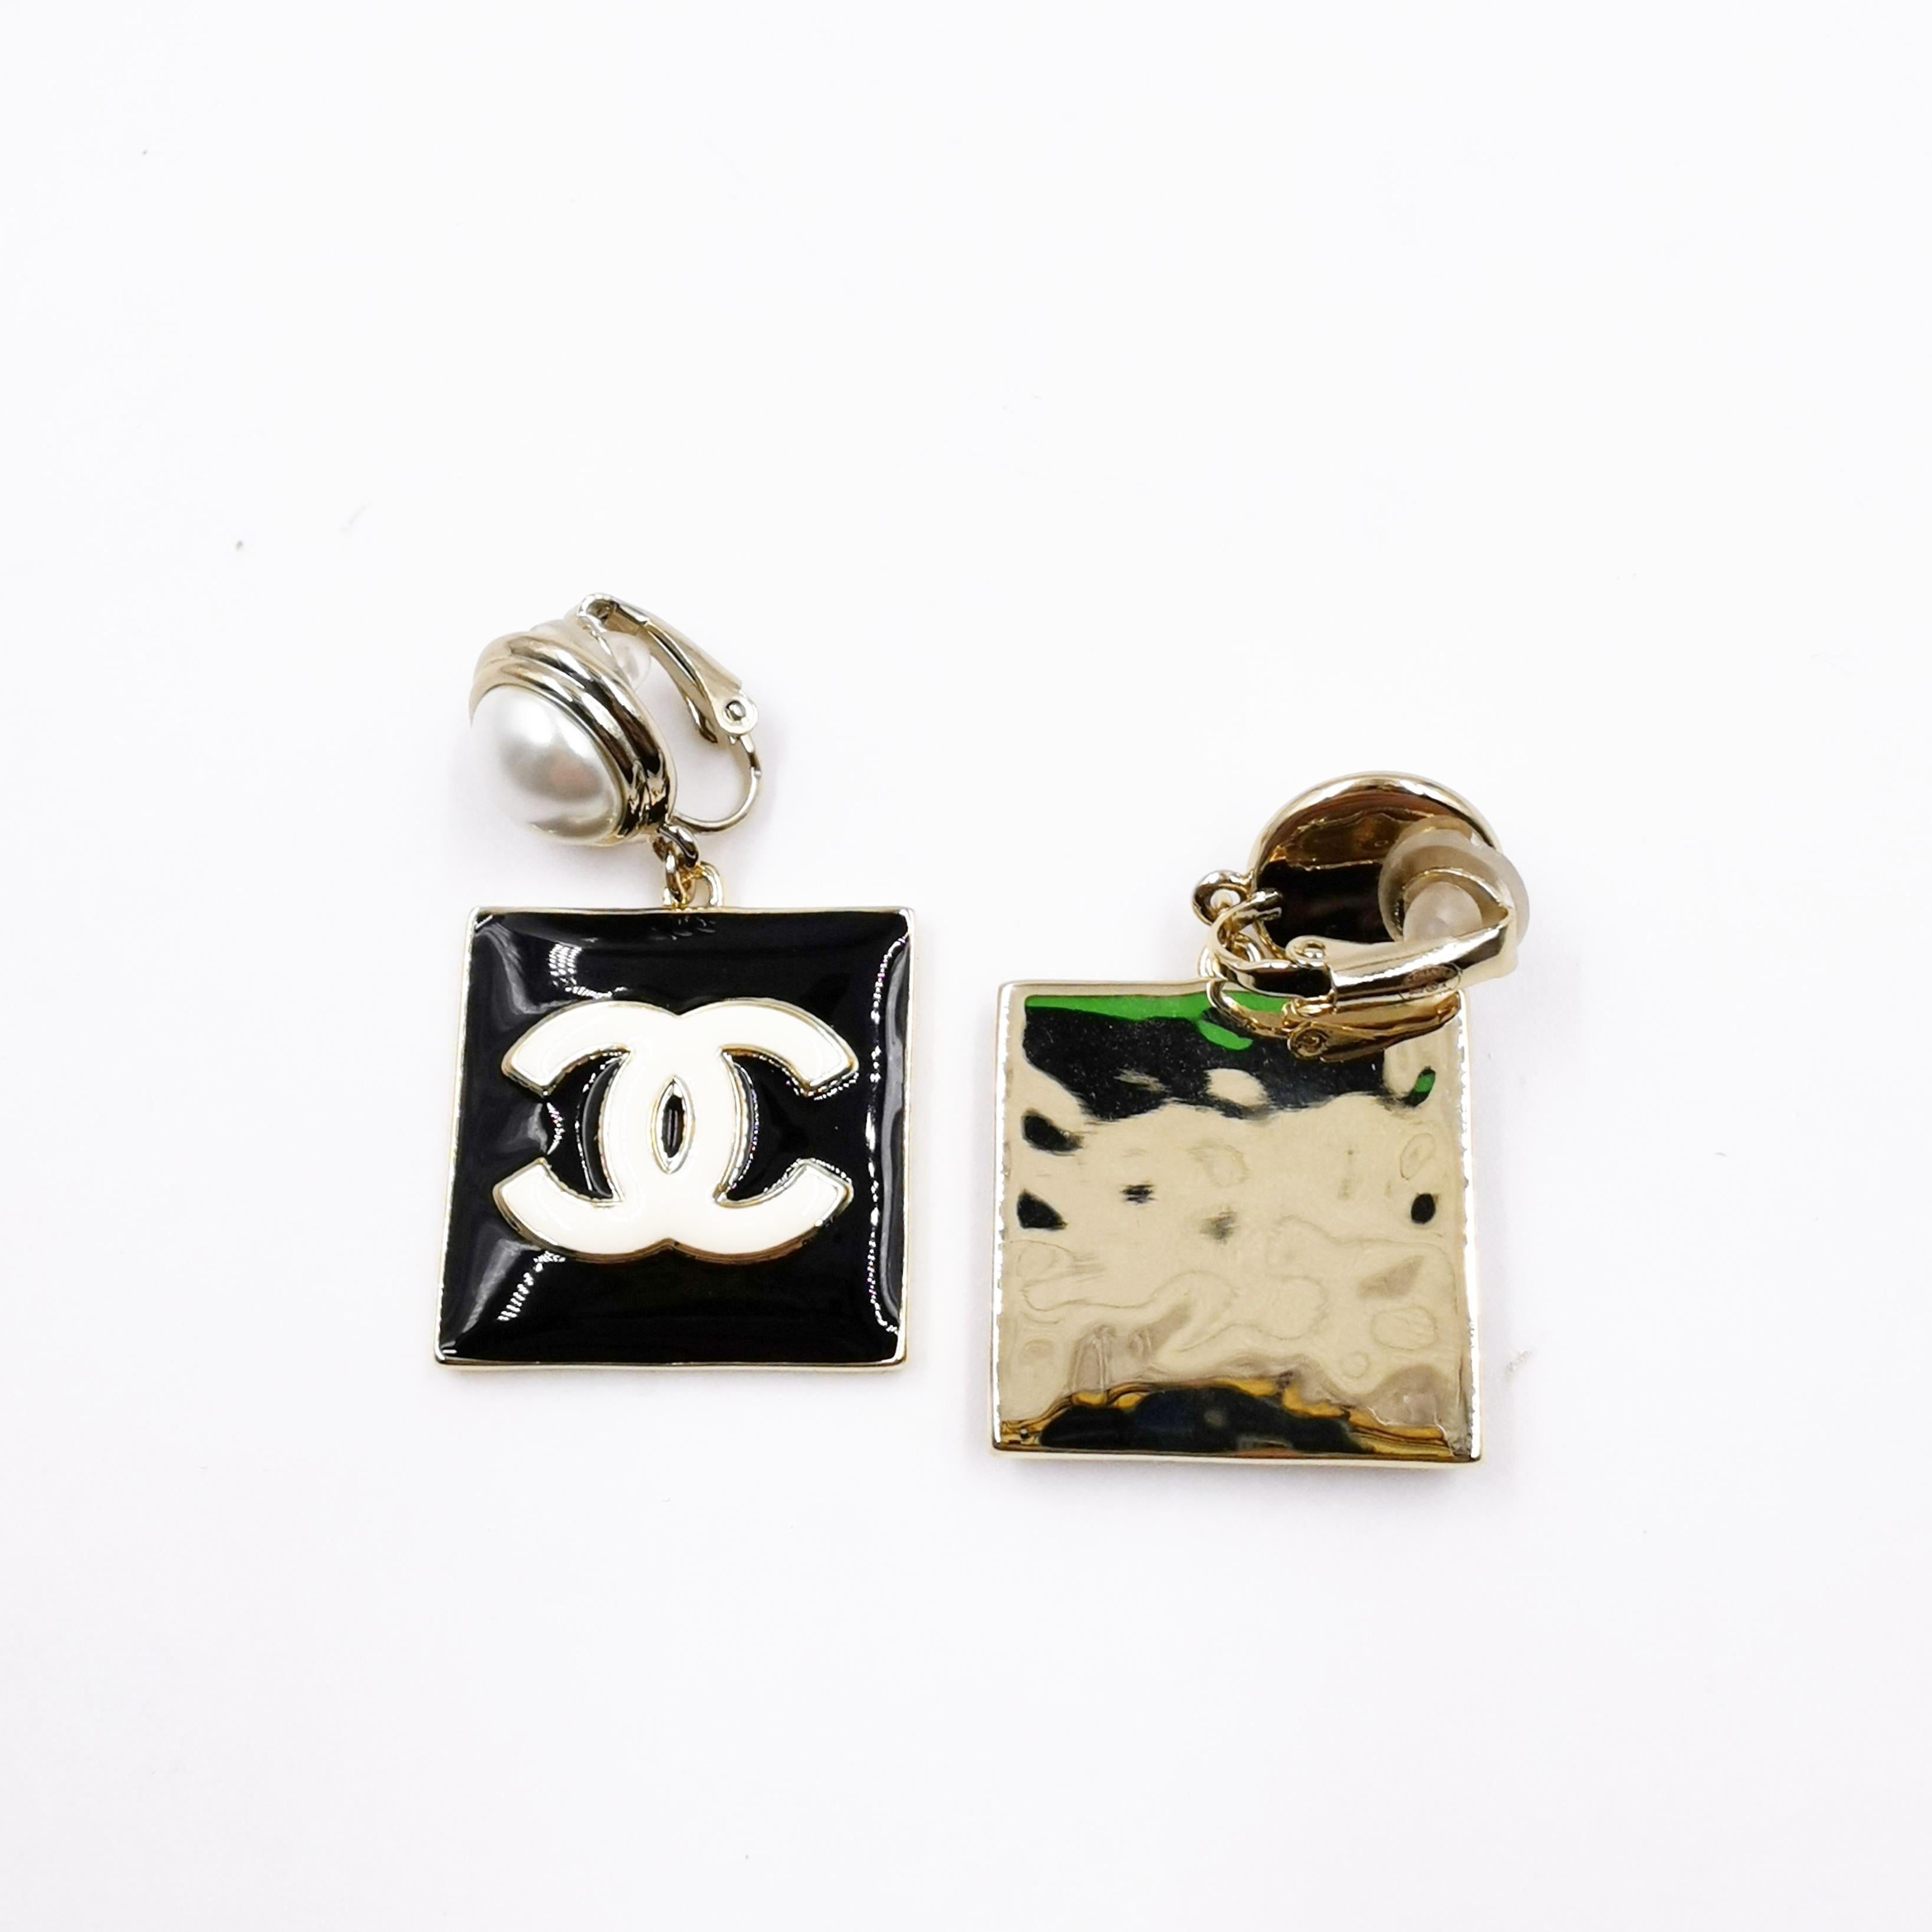 2022 CHANEL Clip on Earrings

Feature
Material: Gold Metal and Black Enamel
Condition: Excellent
Colour: Gold
Period: 2022
Place of Origin: FRANCE